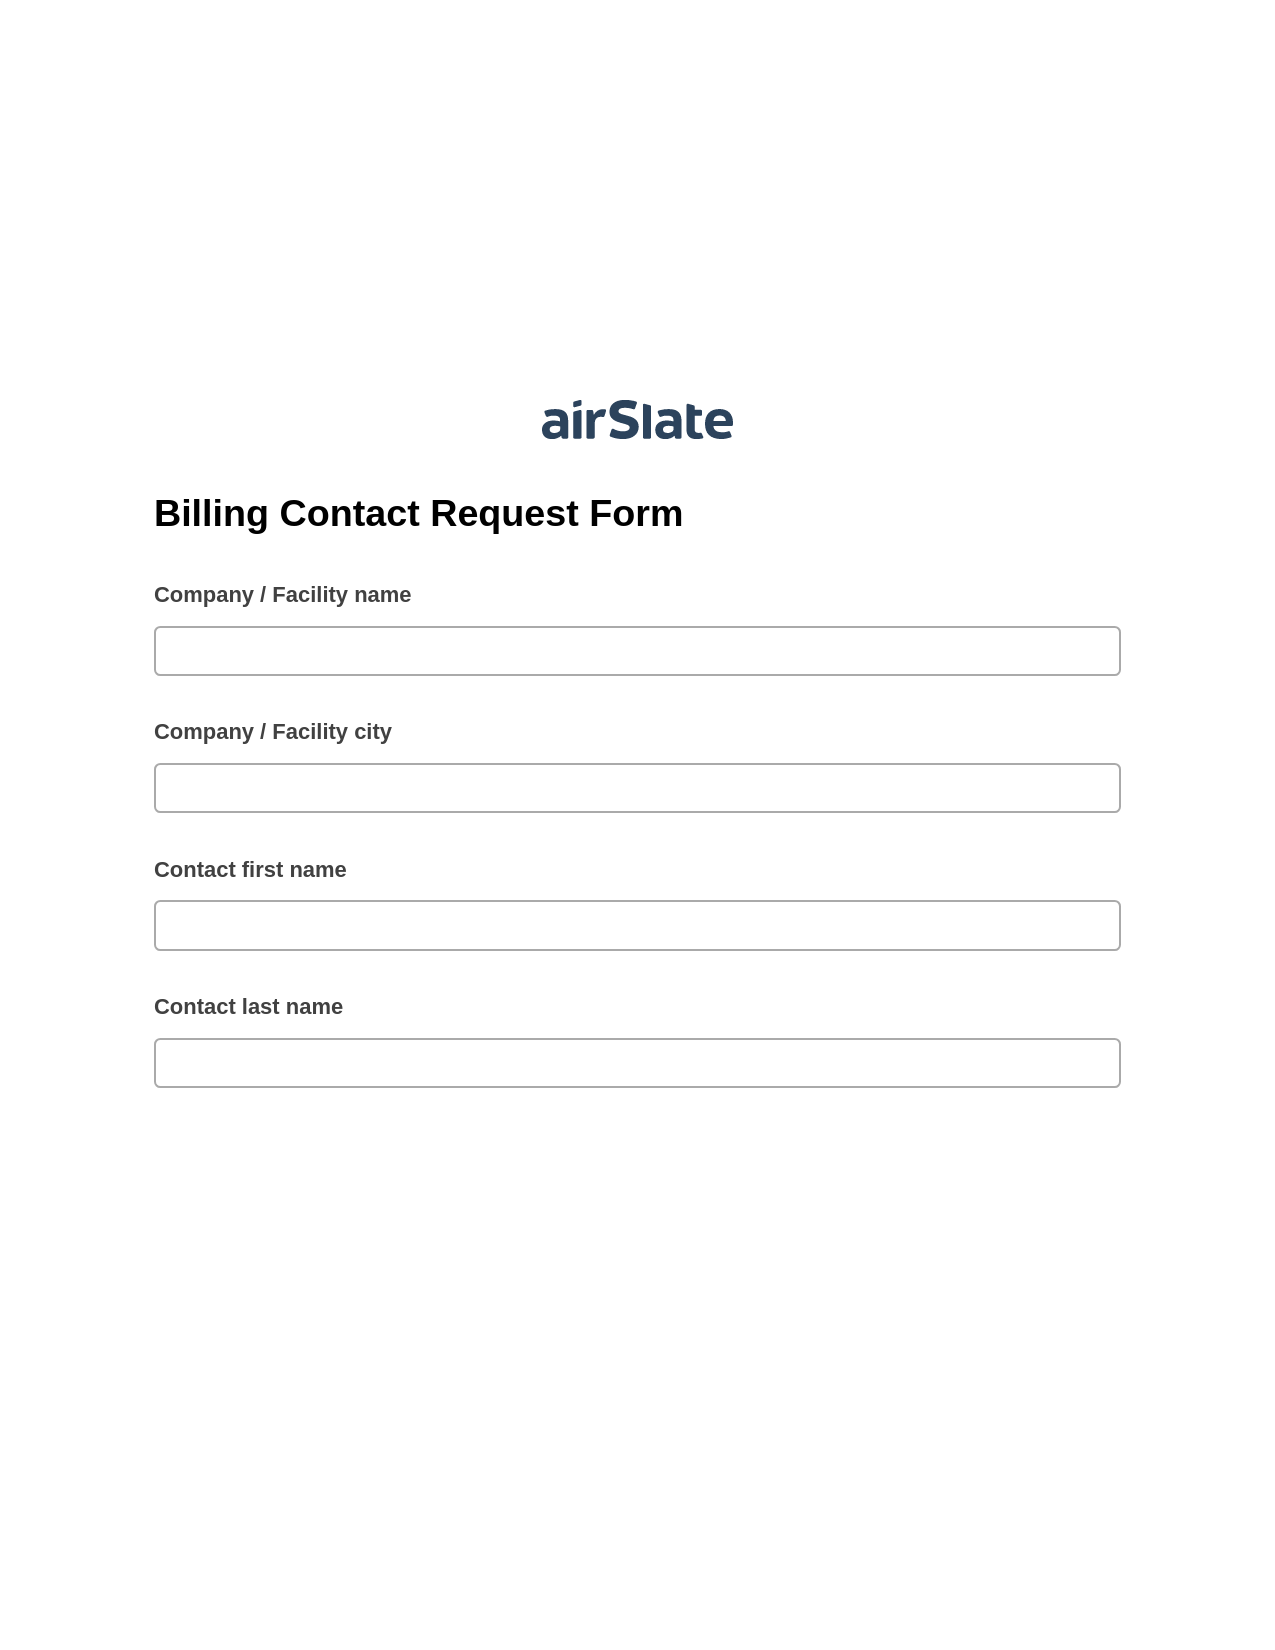 Multirole Billing Contact Request Form Pre-fill from NetSuite Records Bot, SendGrid send Campaign bot, Post-finish Document Bot